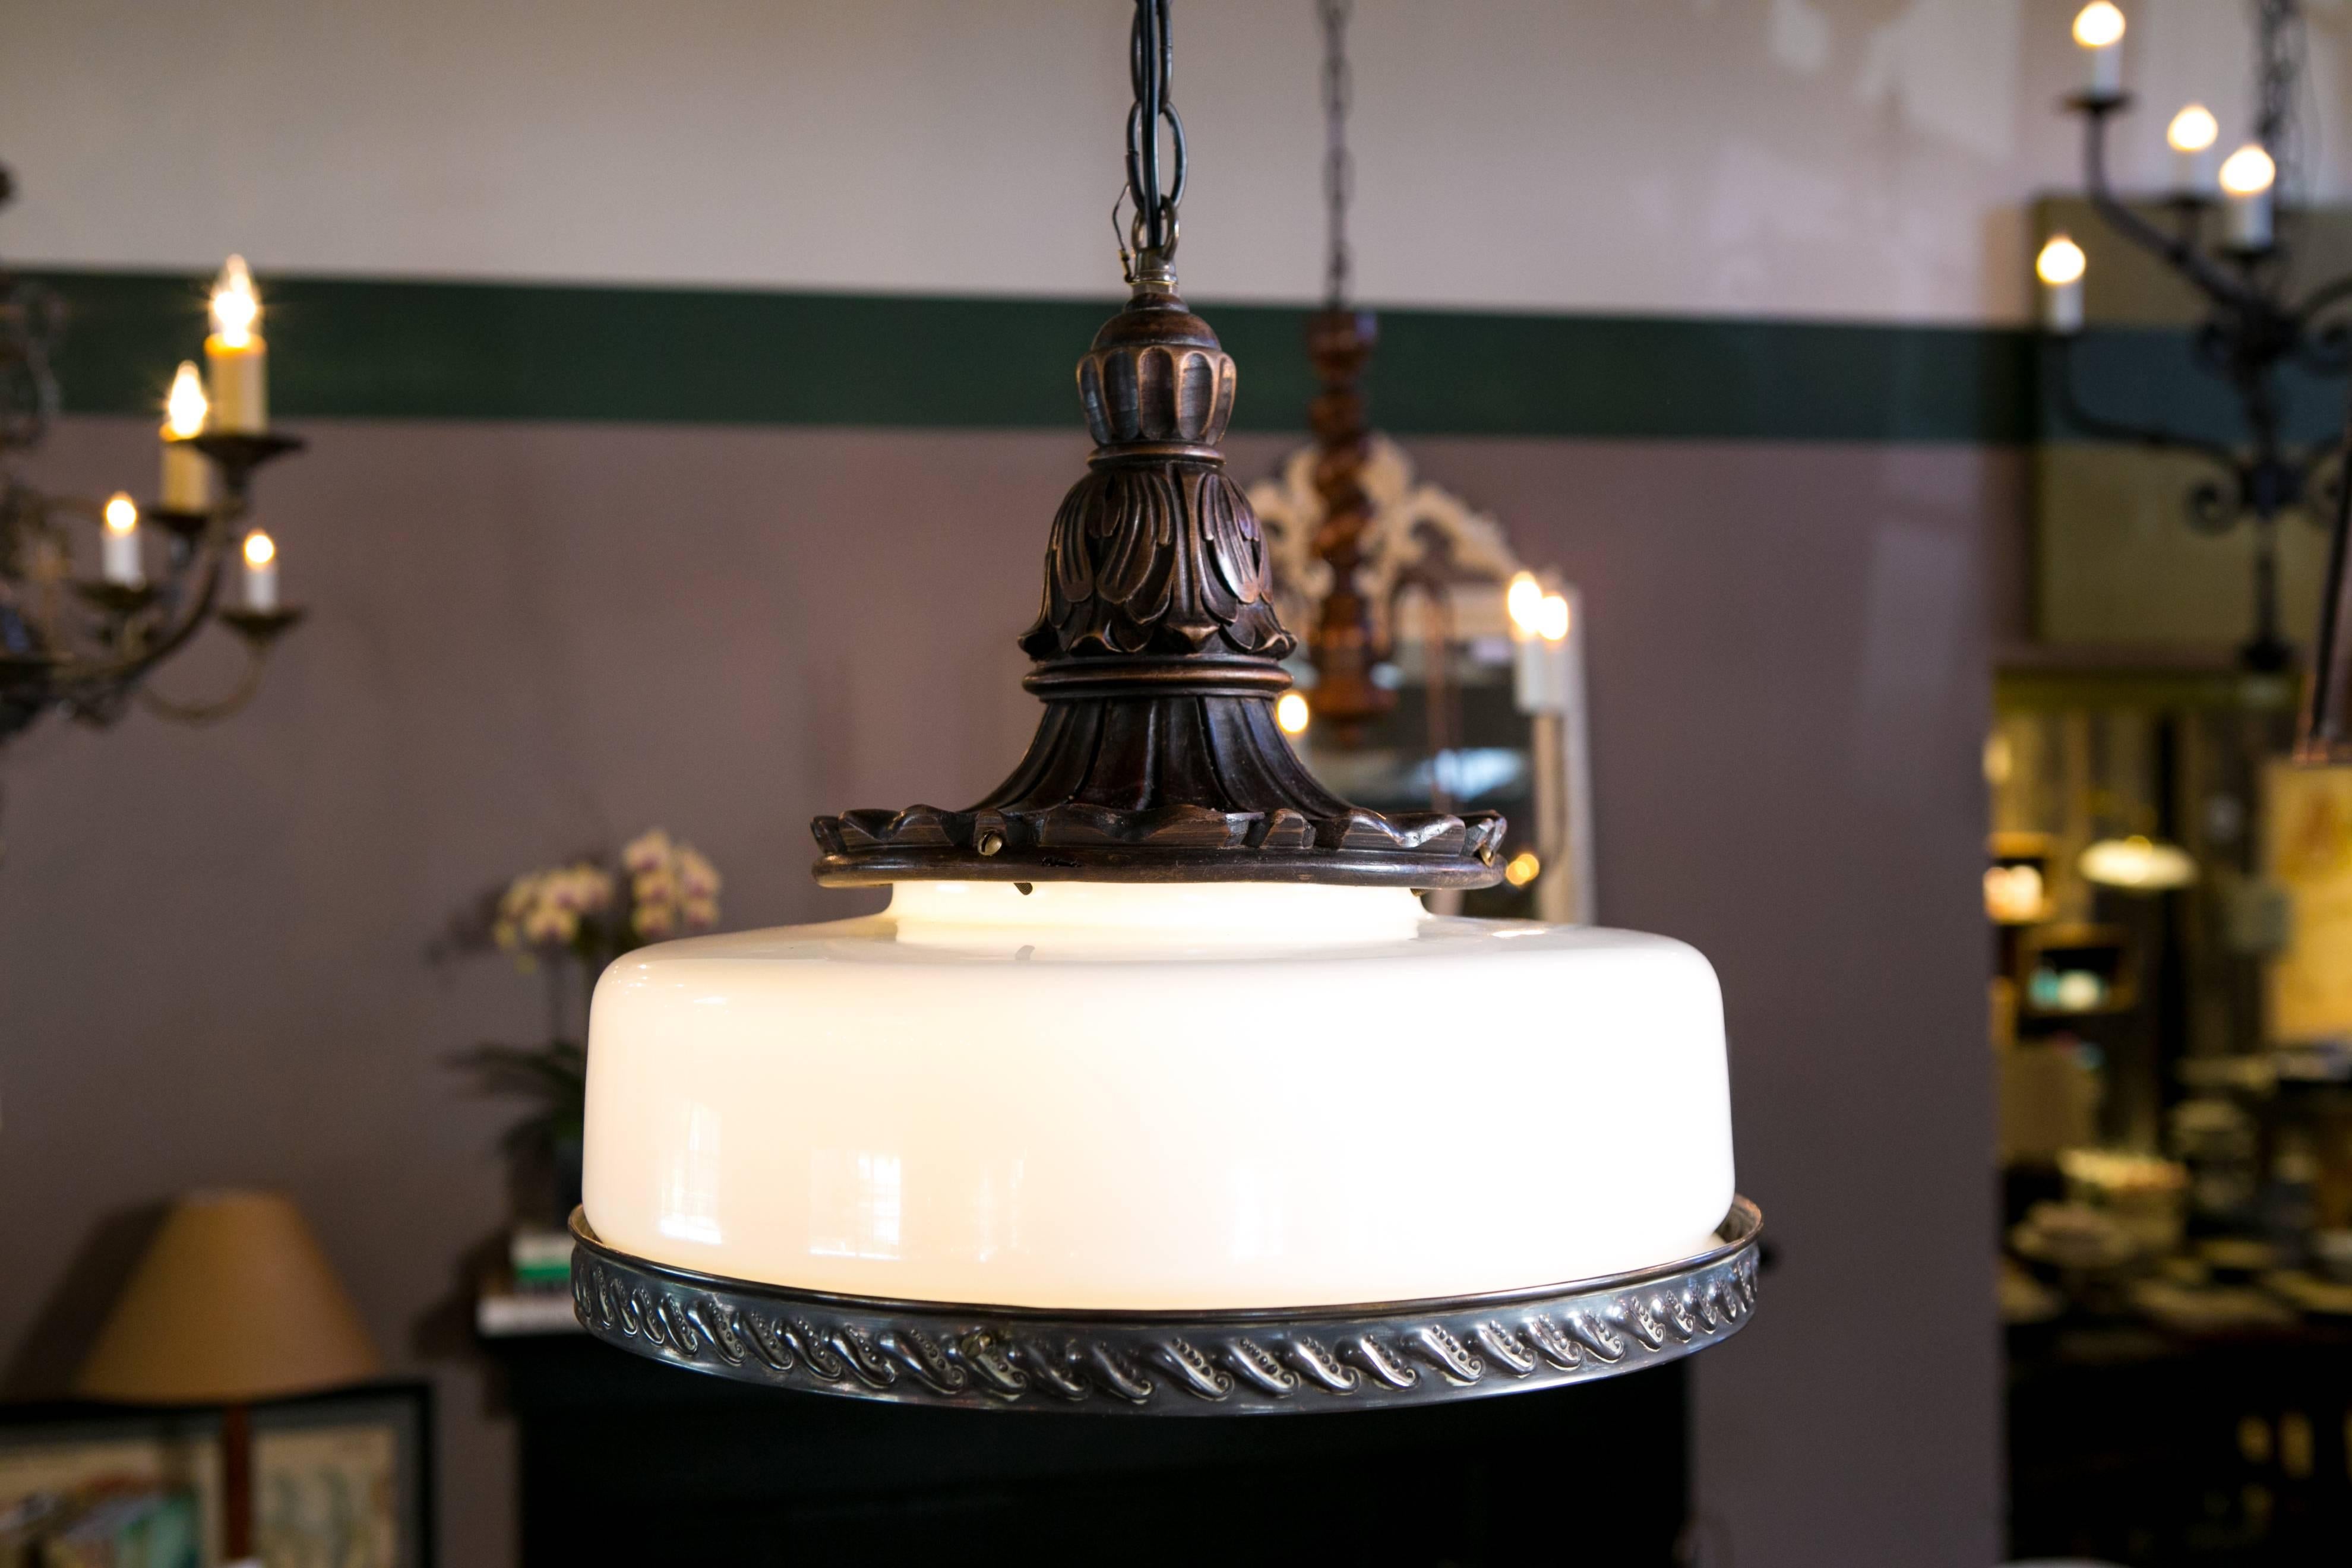 One of a kind handblown vintage milk glass shade with stamped brass banding and a hand-carved antique wood top. Newly wired in the USA with all UL listed parts and a single porcelain Edison socket. Our exclusive design made from vintage and antique